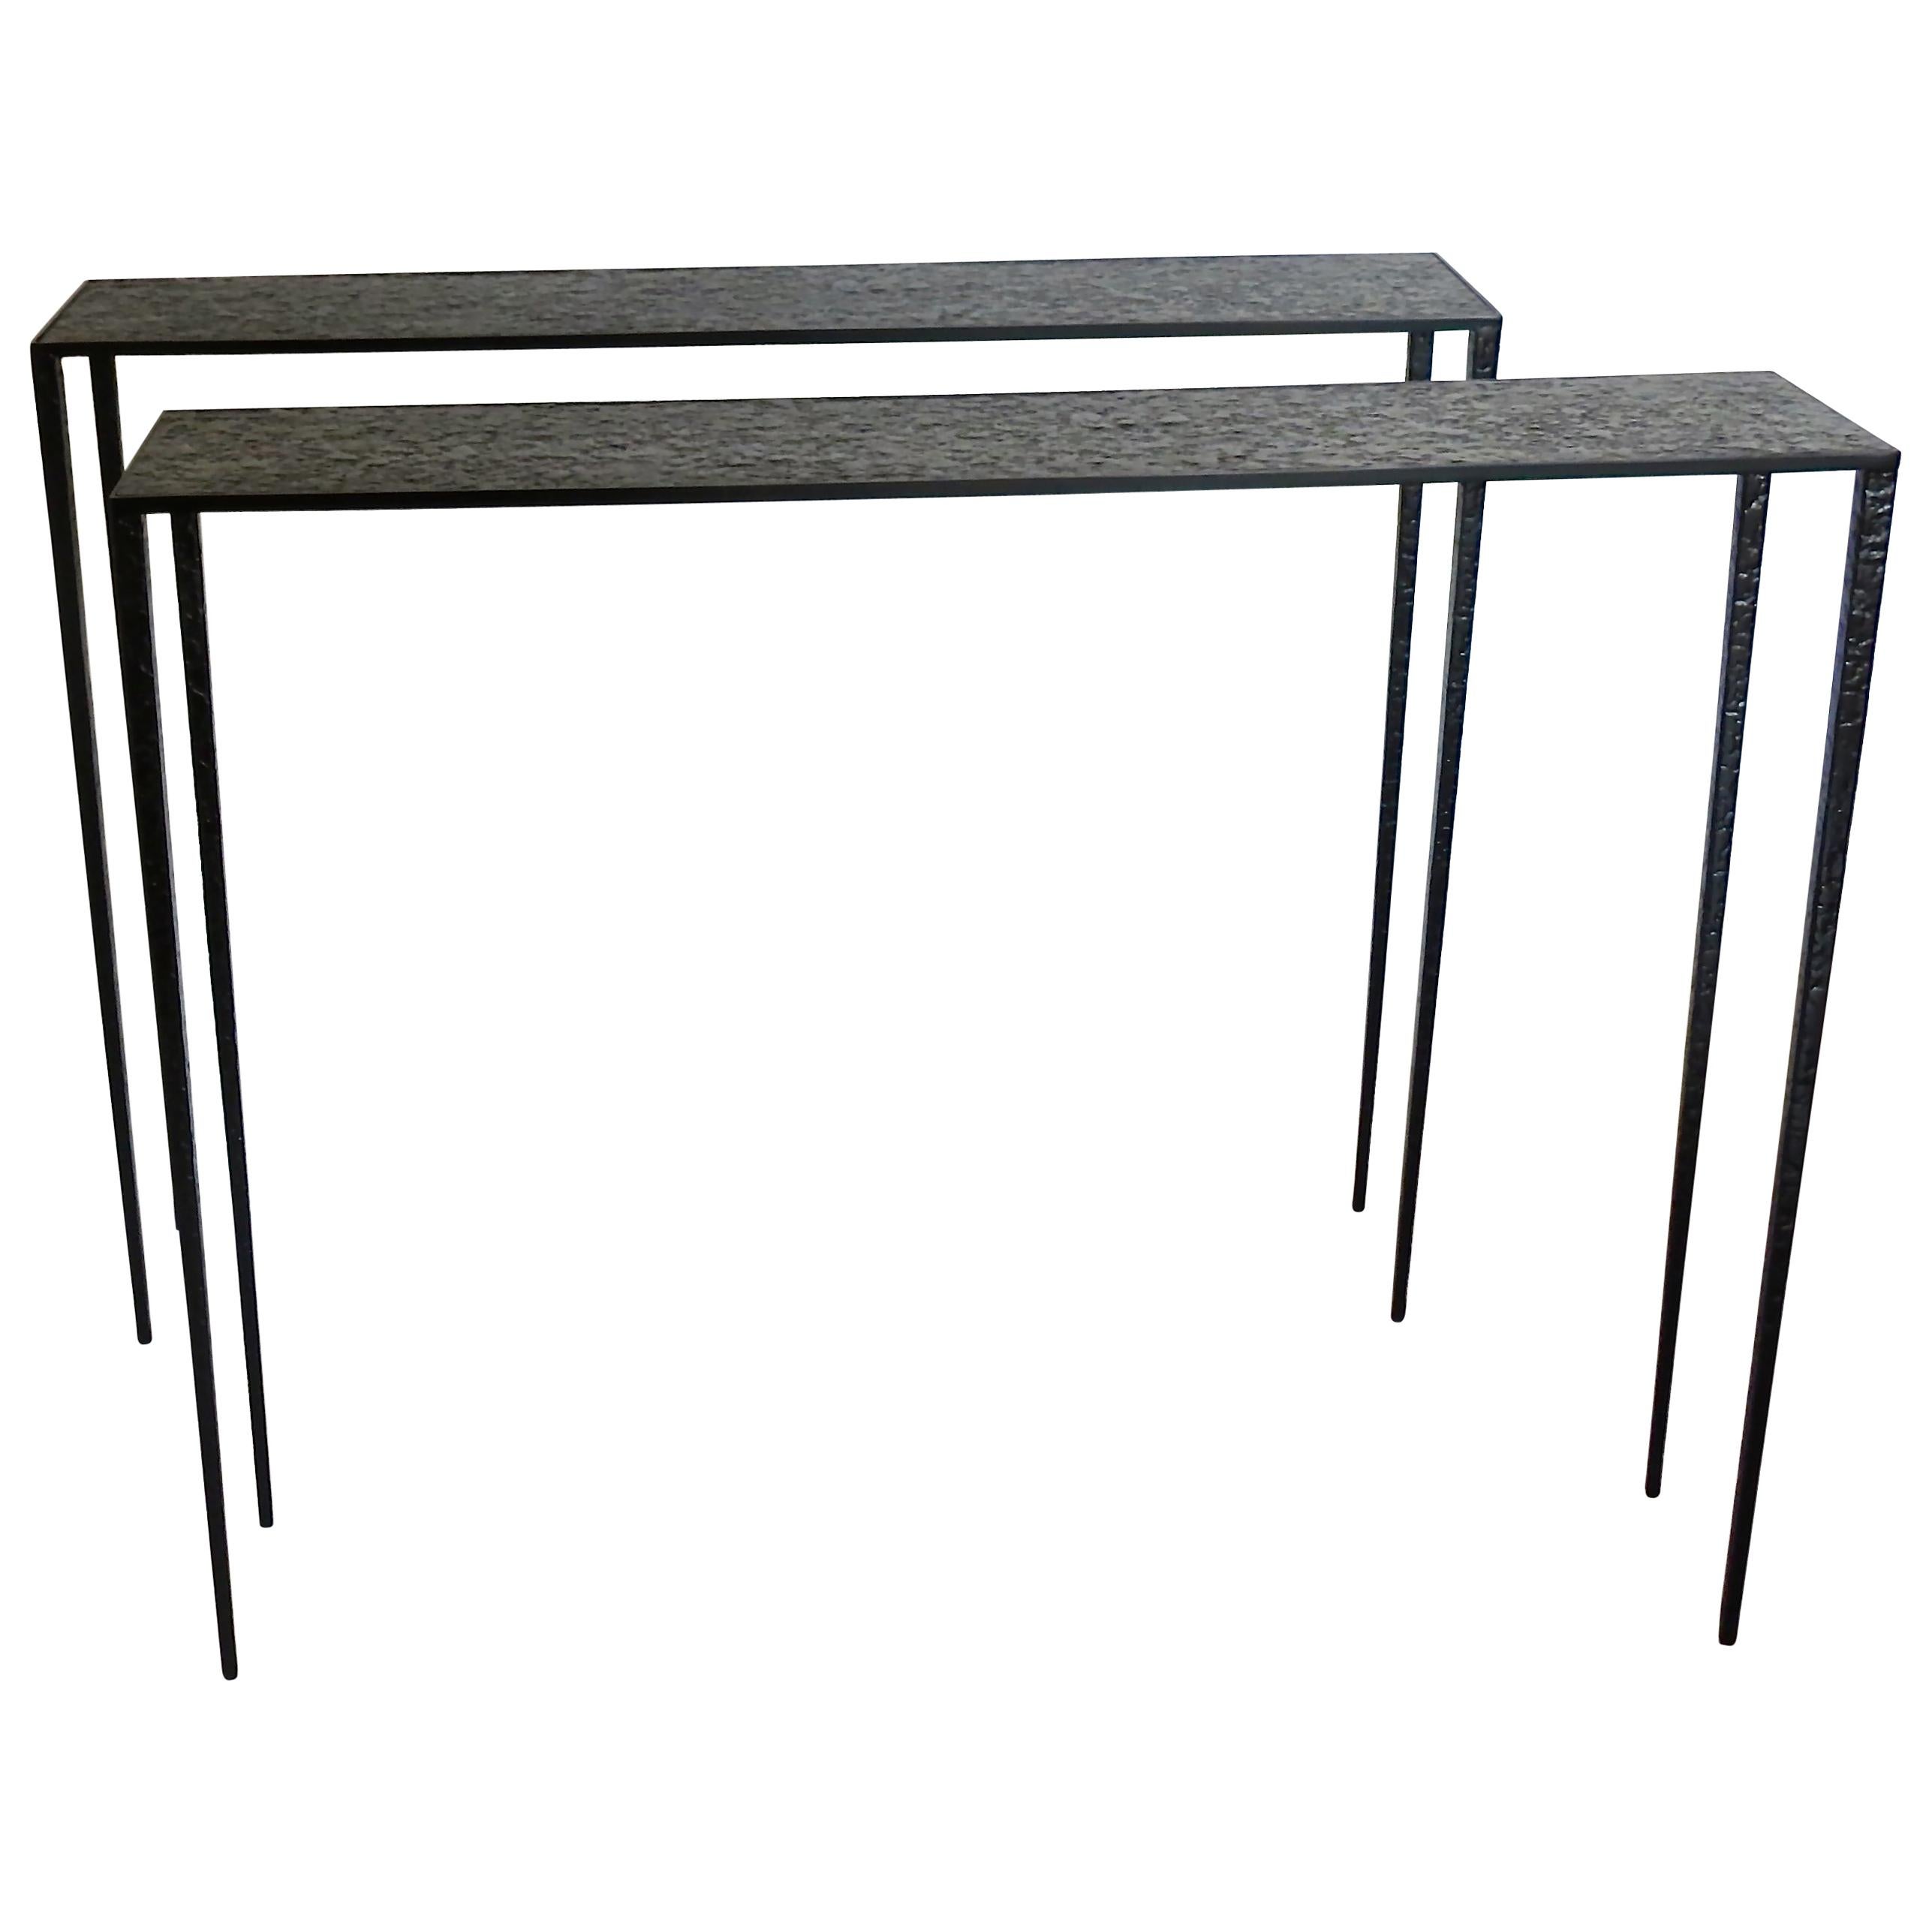 Pair of Important Black Brass Console Tables "Essenziali" Produced by CG, 2018 For Sale